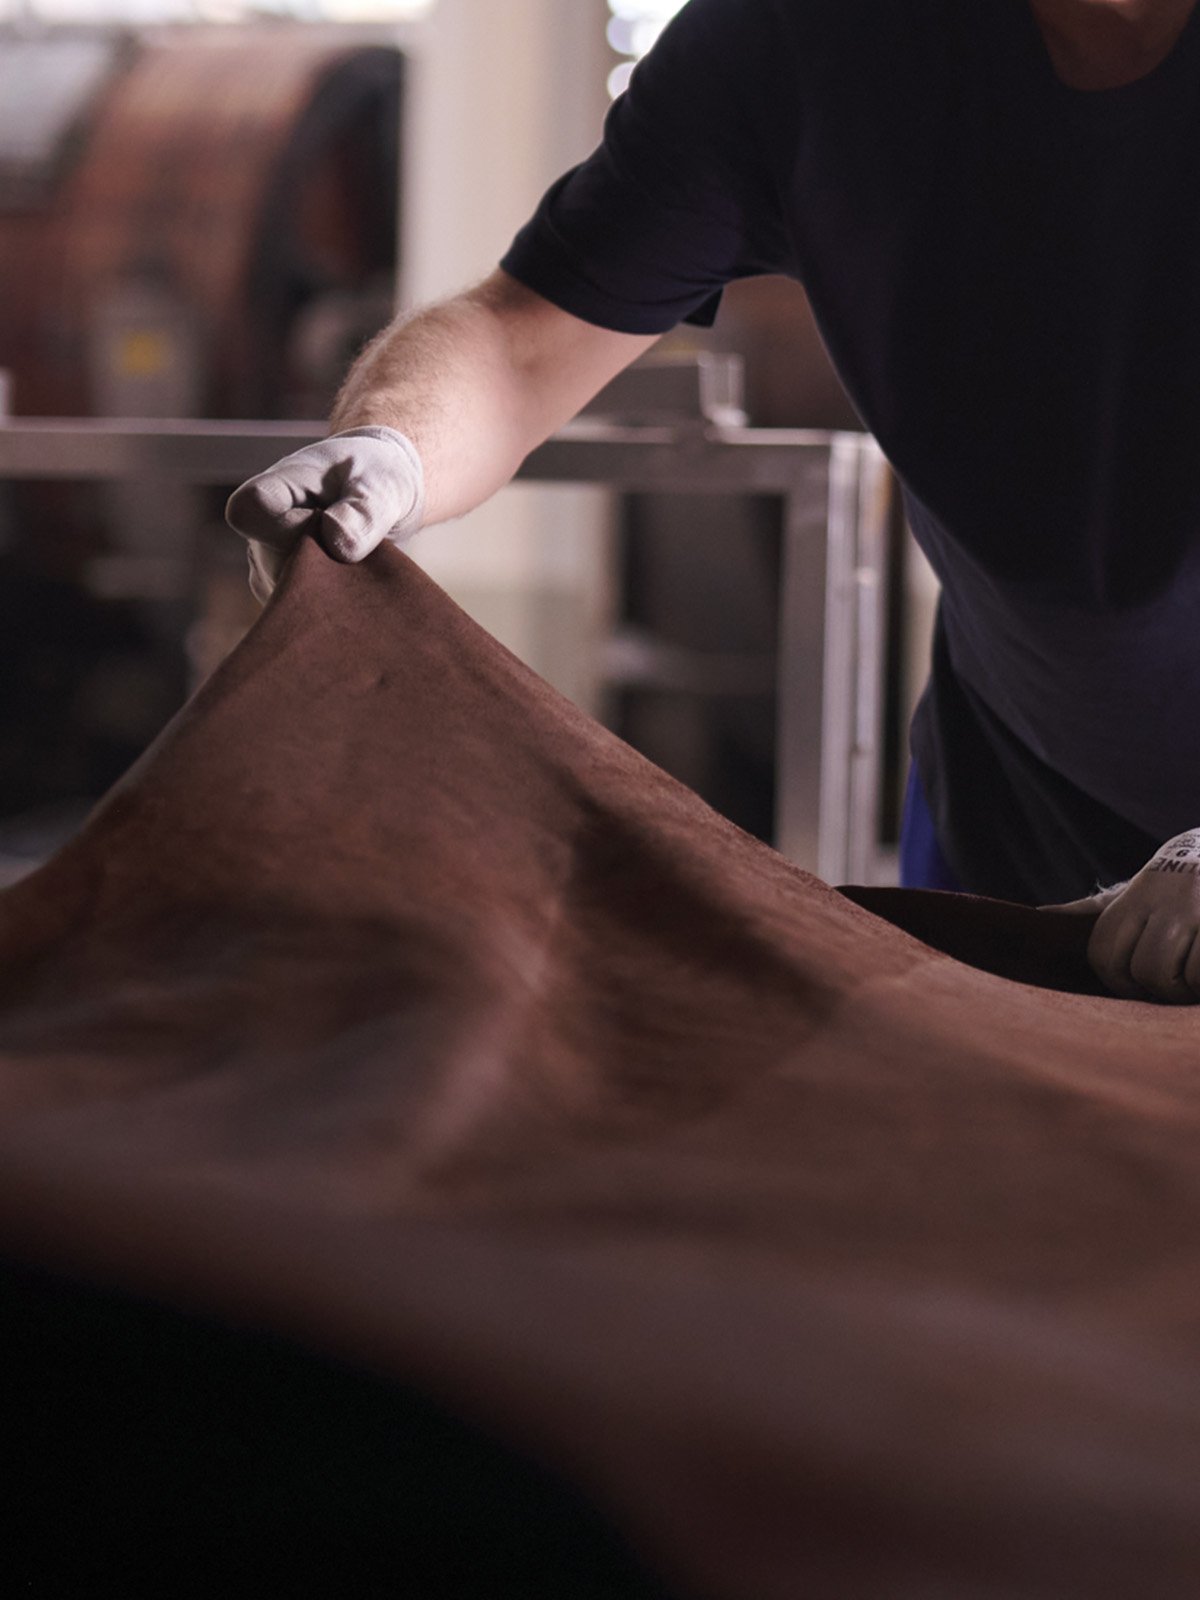 How do you become a sustainable tannery? Here are 3 virtuous examples